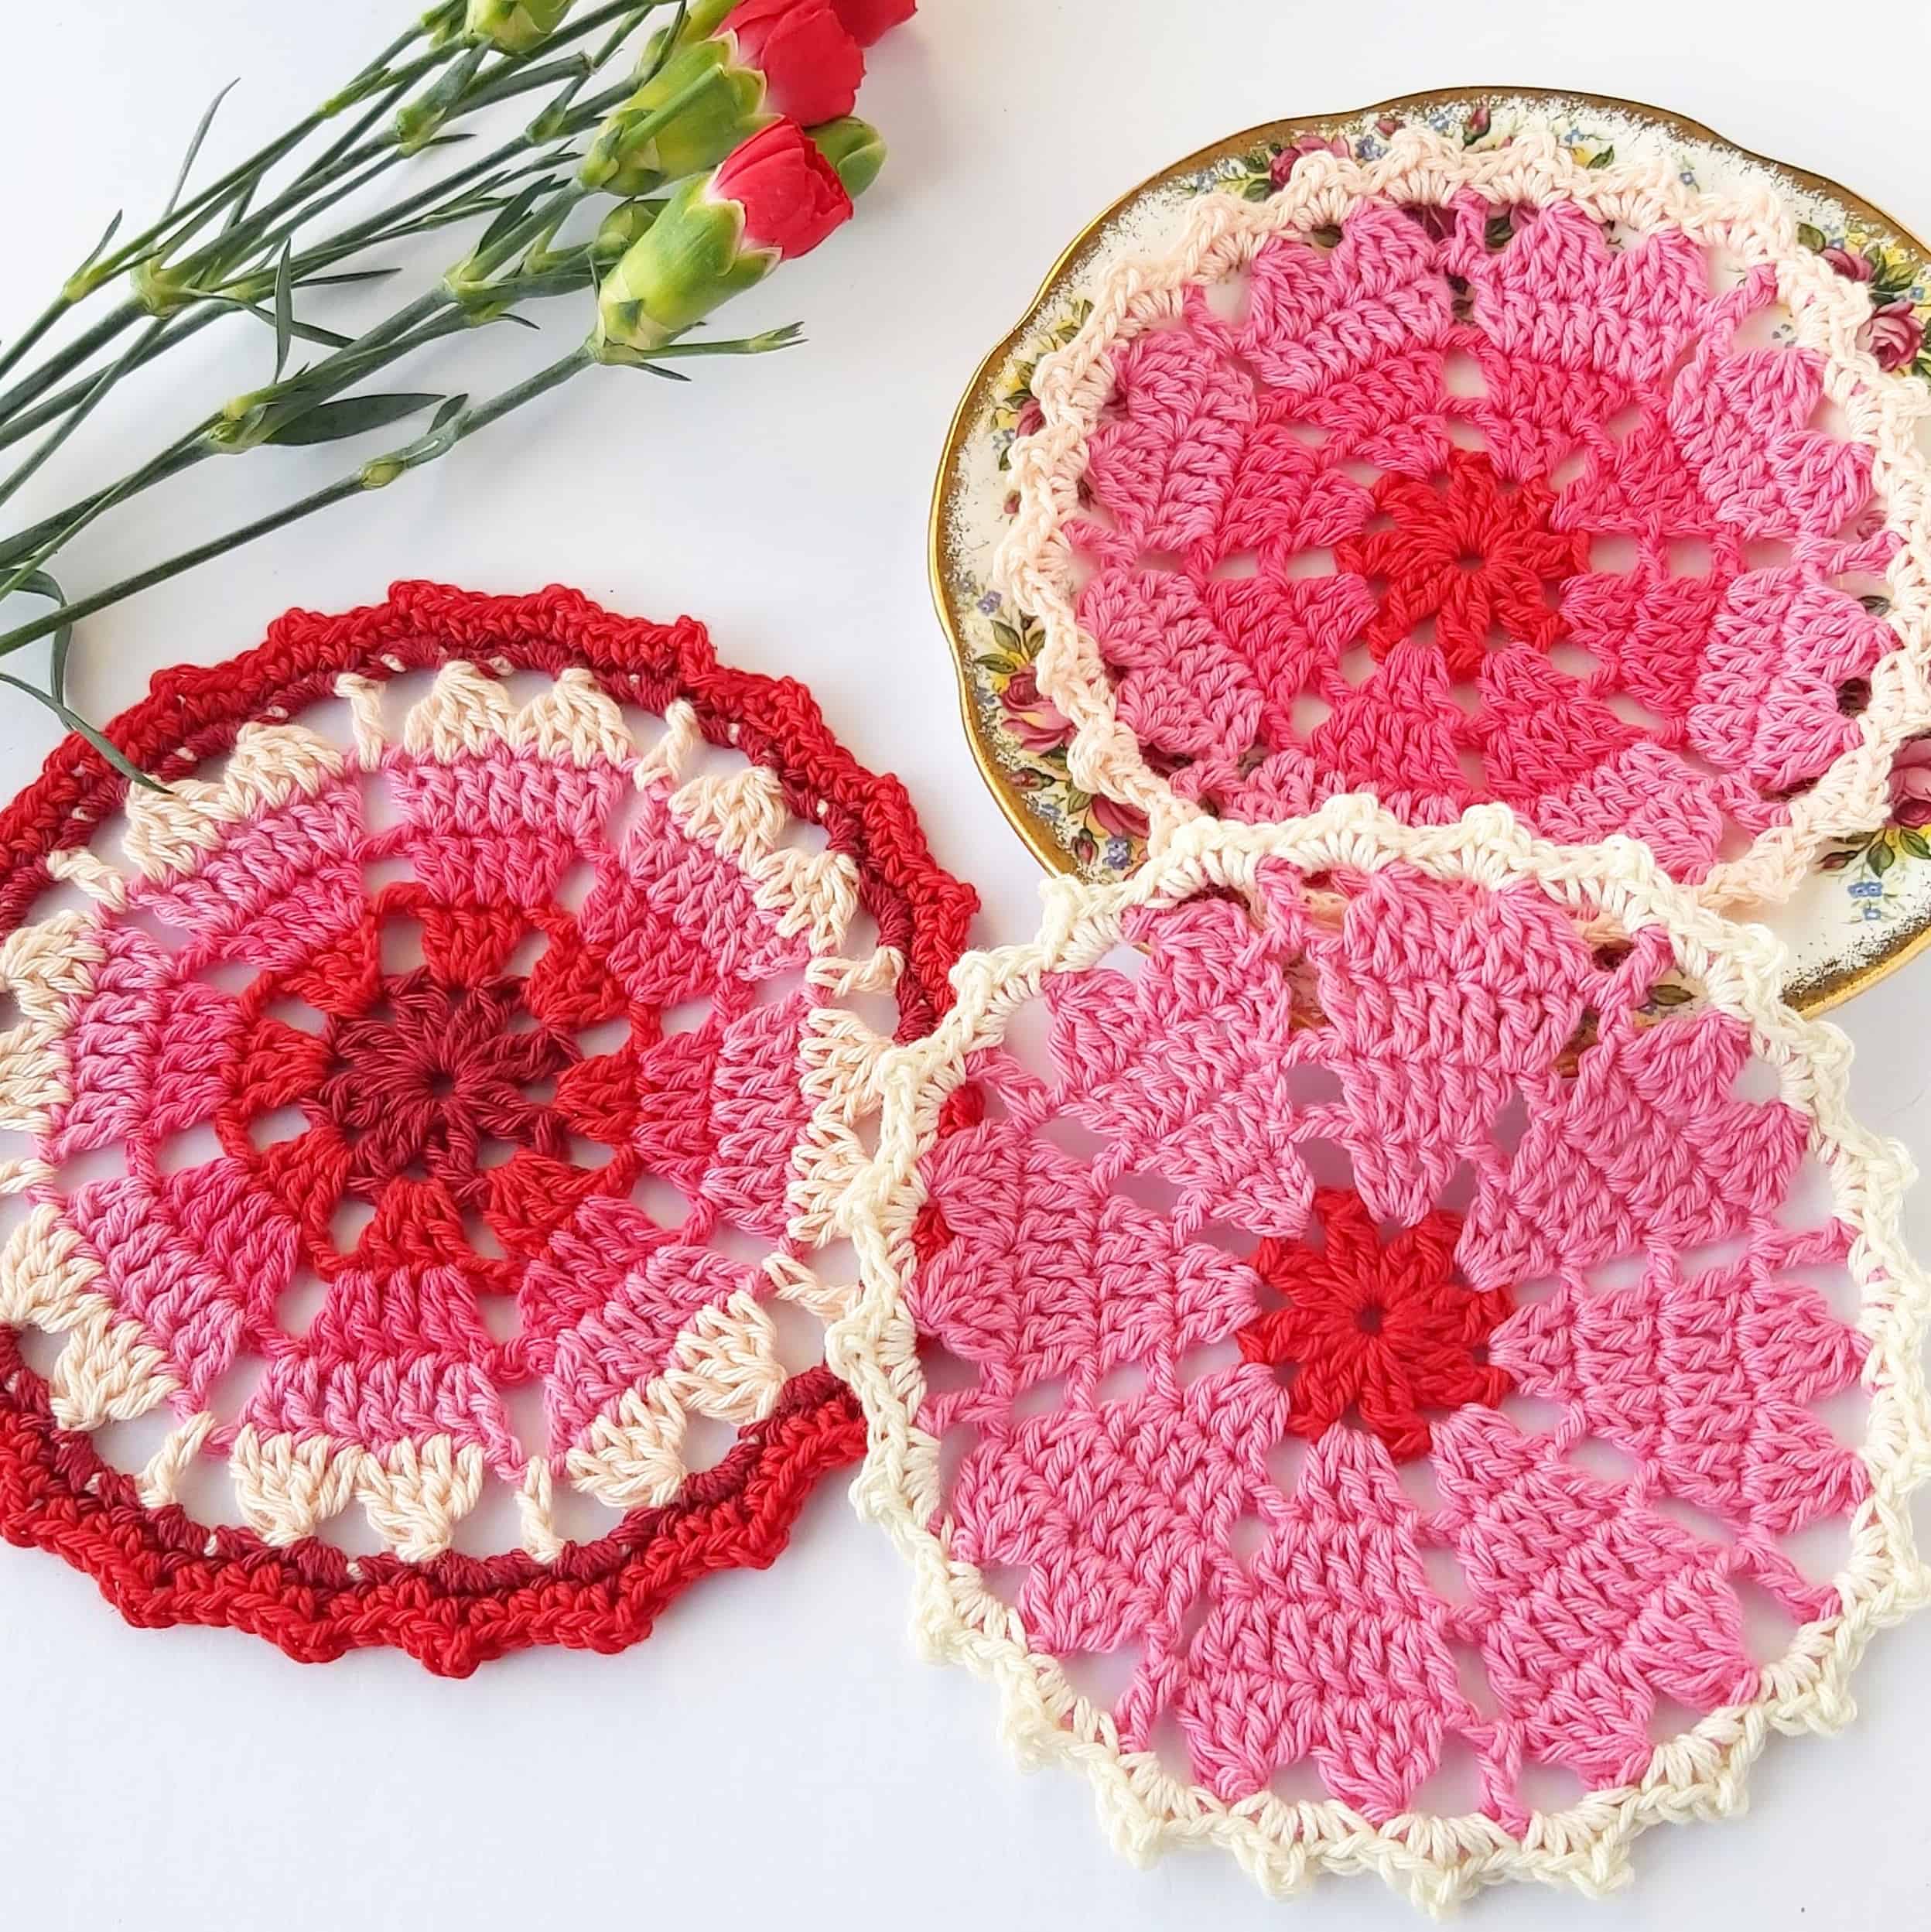 Crochet Heart Coaster for Valentine’s Day – Free Pattern